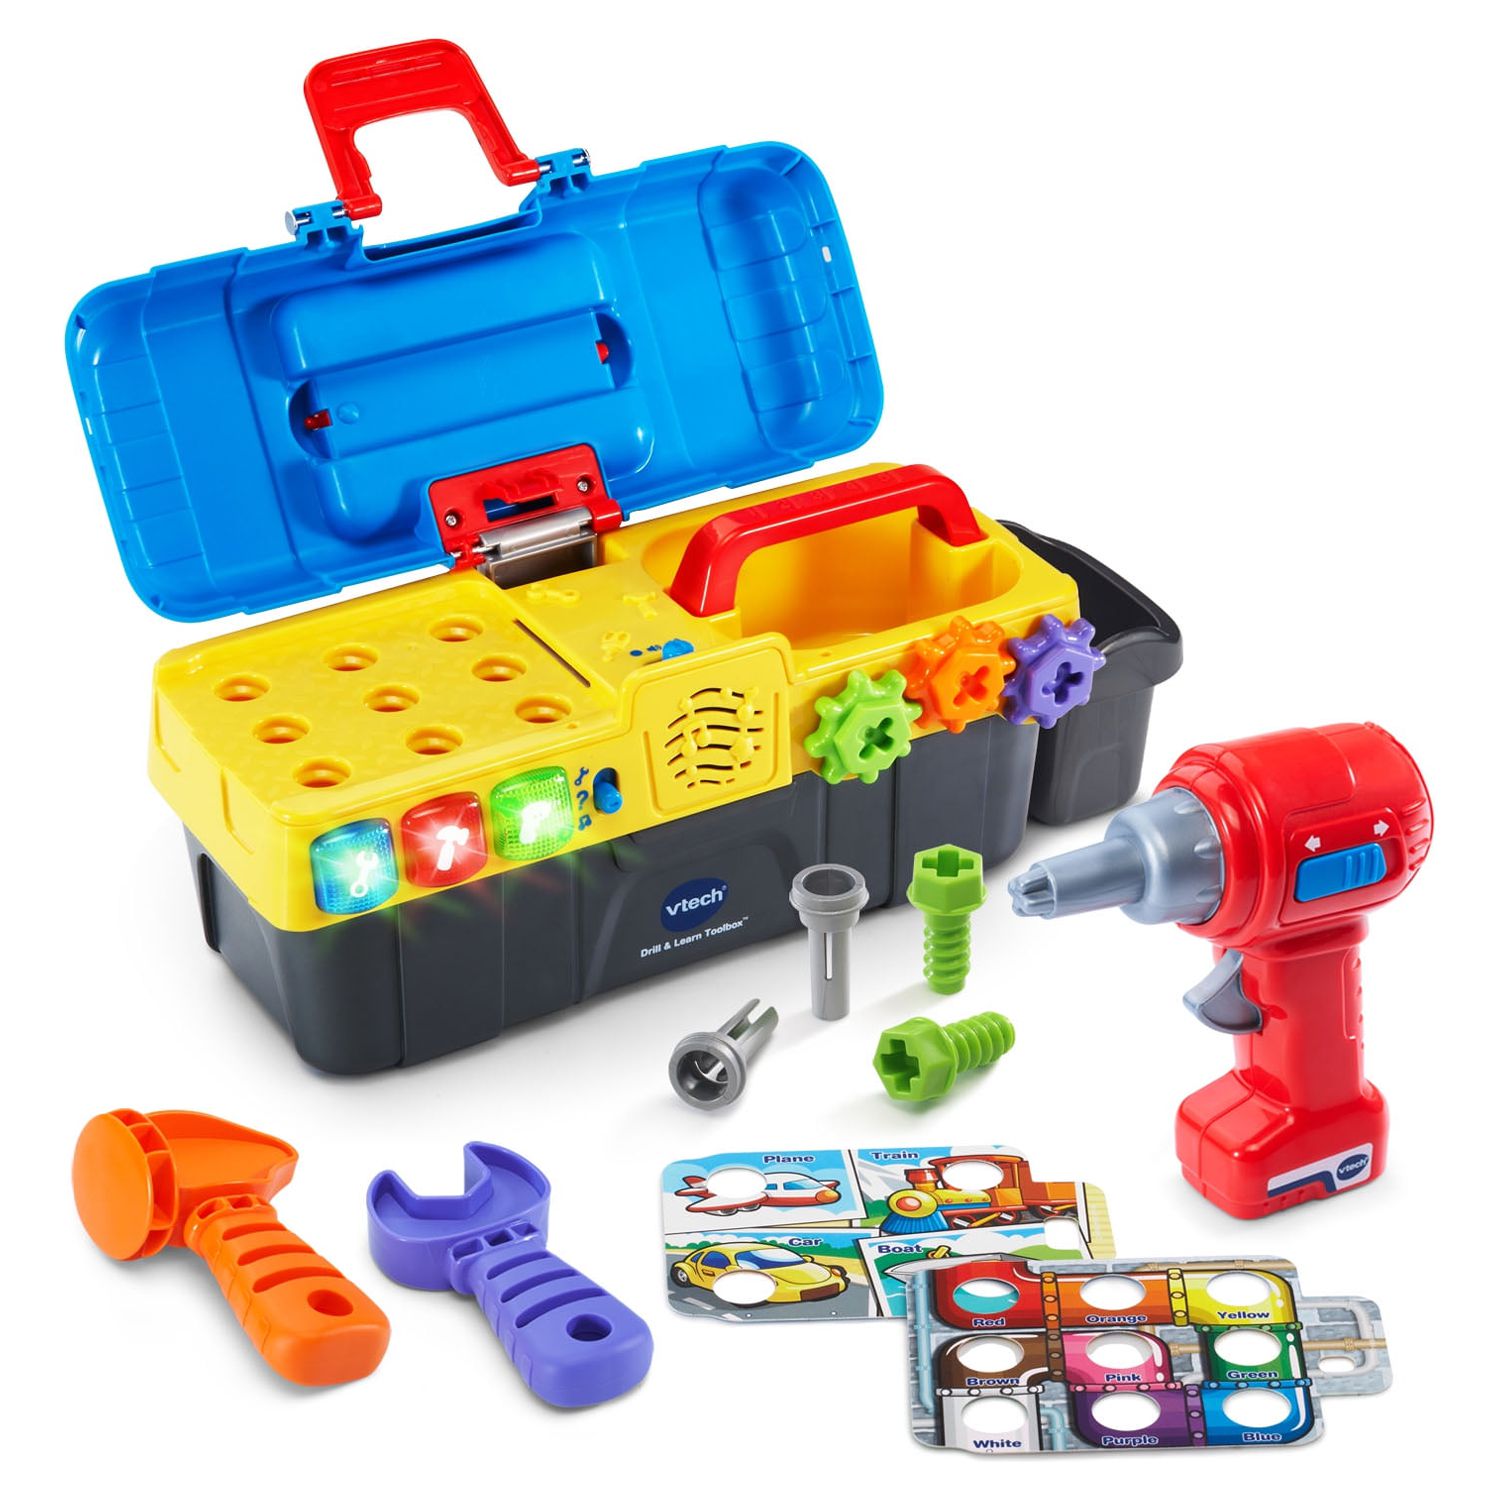 VTech Drill and Learn Toolbox With Working Drill and Tools - image 1 of 5